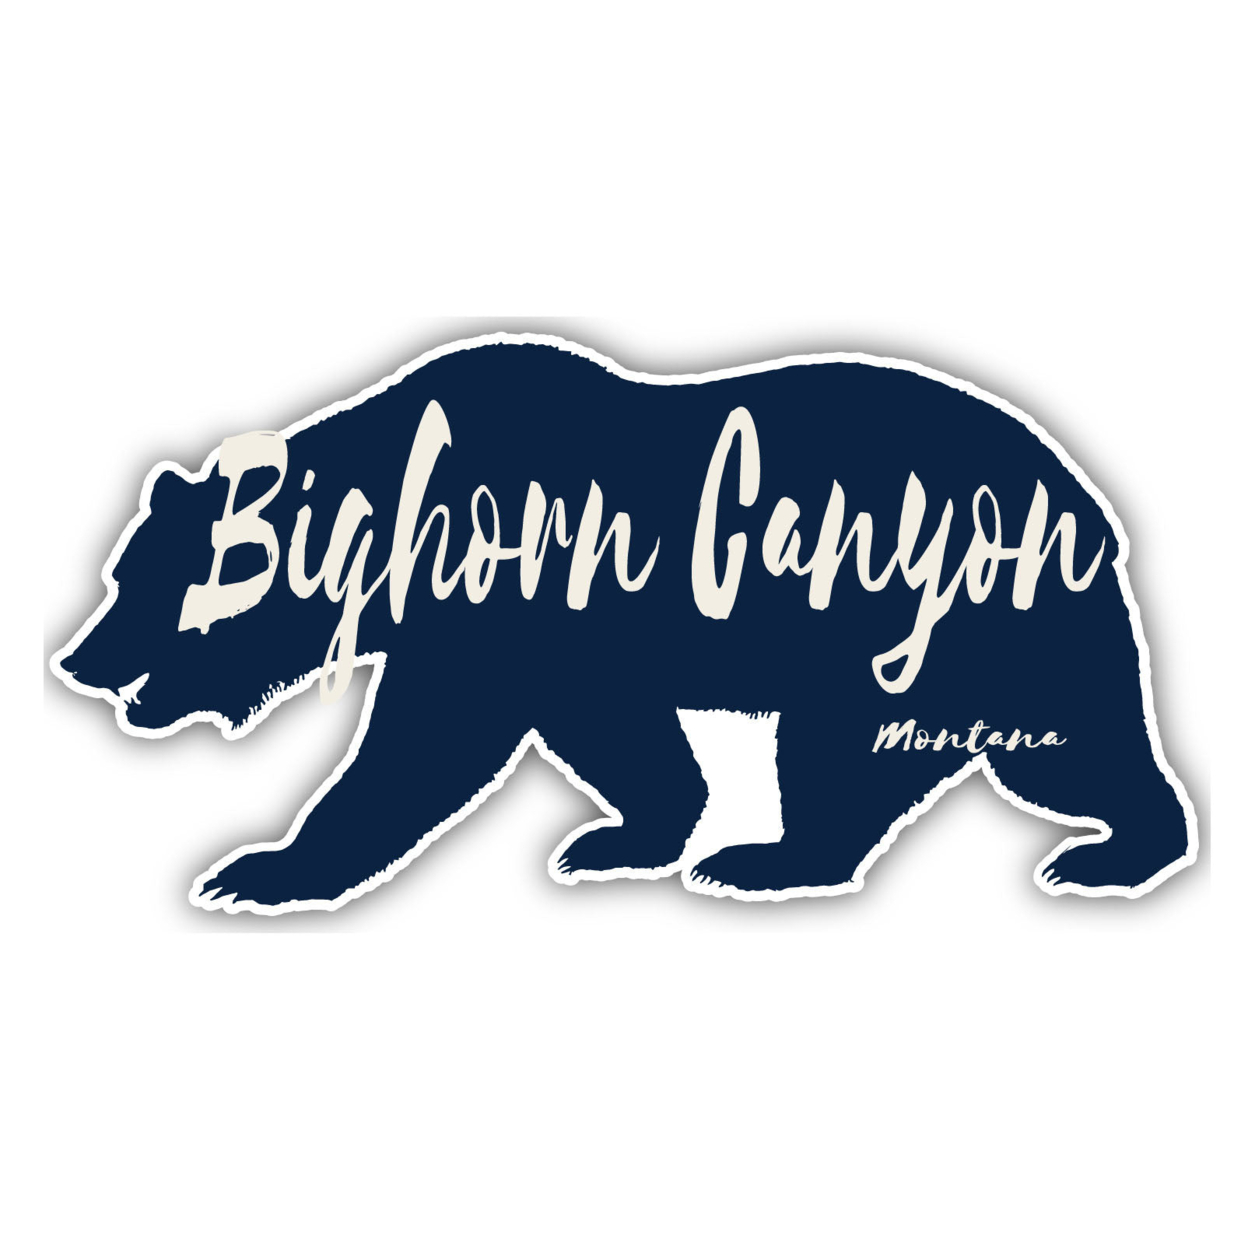 Bighorn Canyon Montana Souvenir Decorative Stickers (Choose Theme And Size) - 4-Pack, 8-Inch, Bear